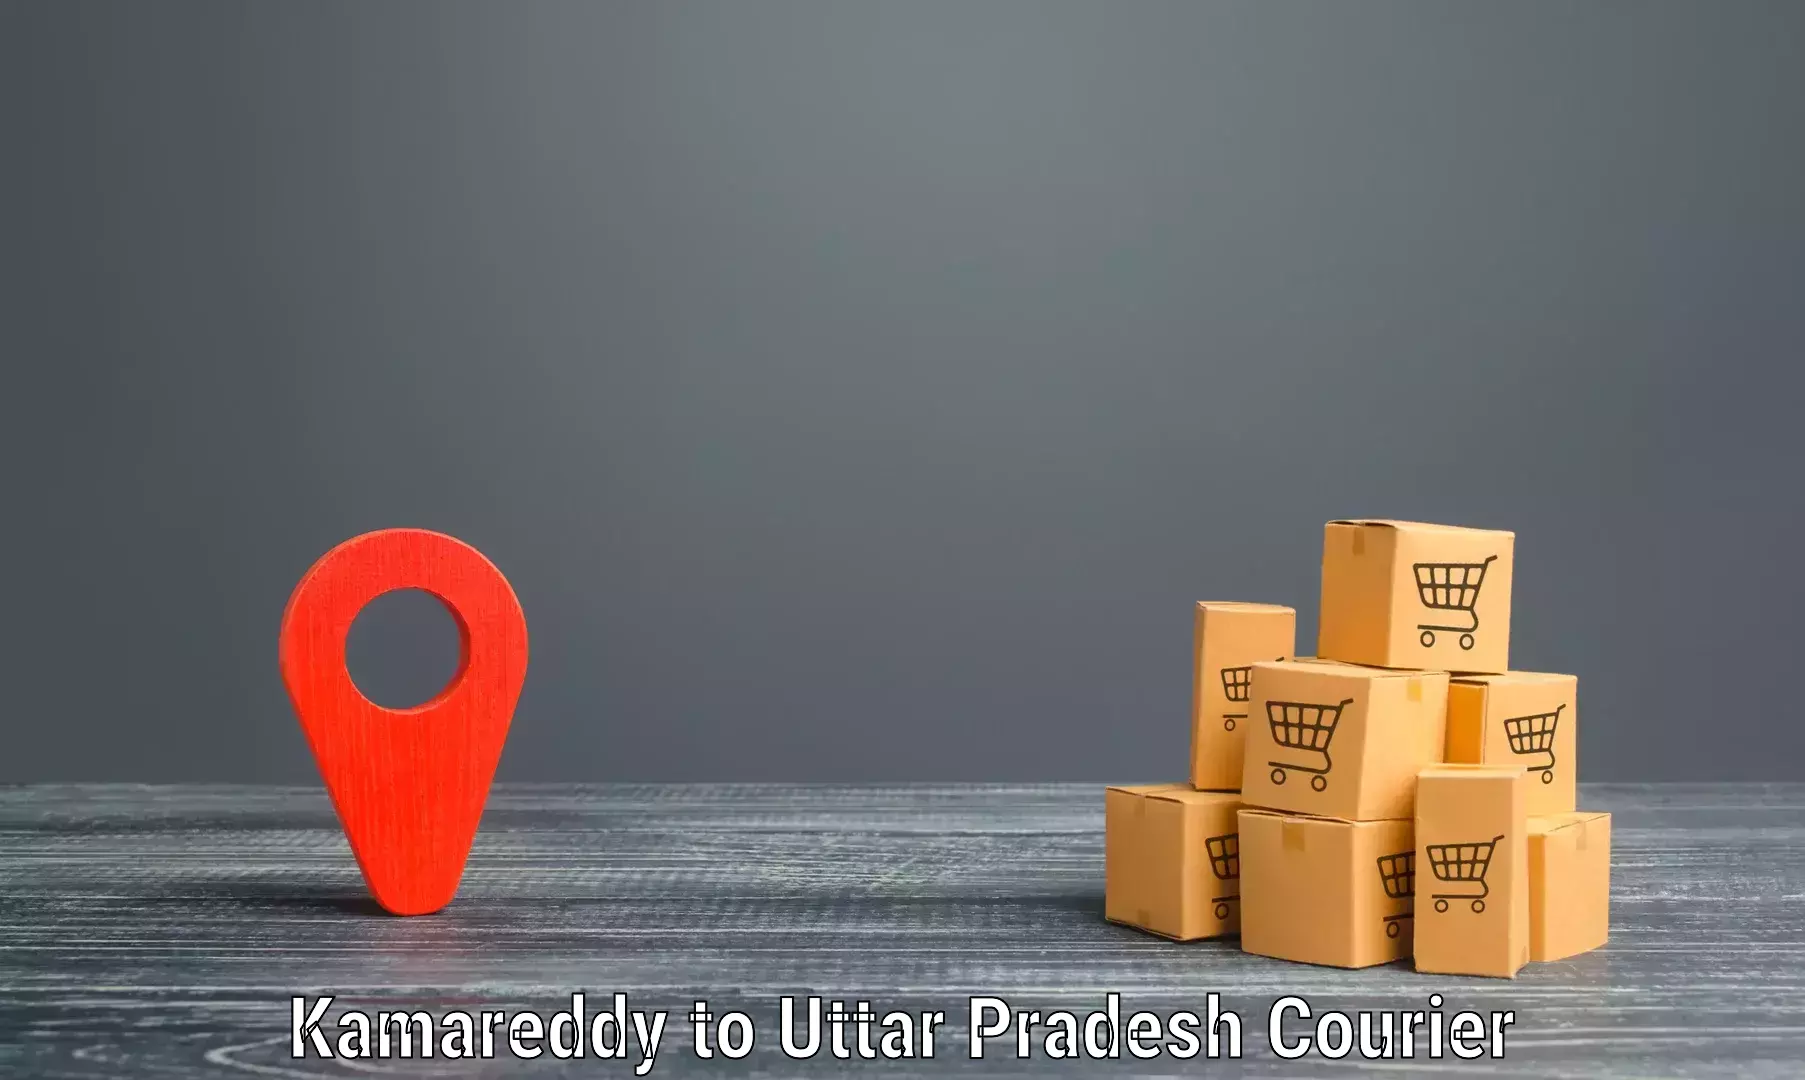 Online shipping calculator Kamareddy to Lucknow